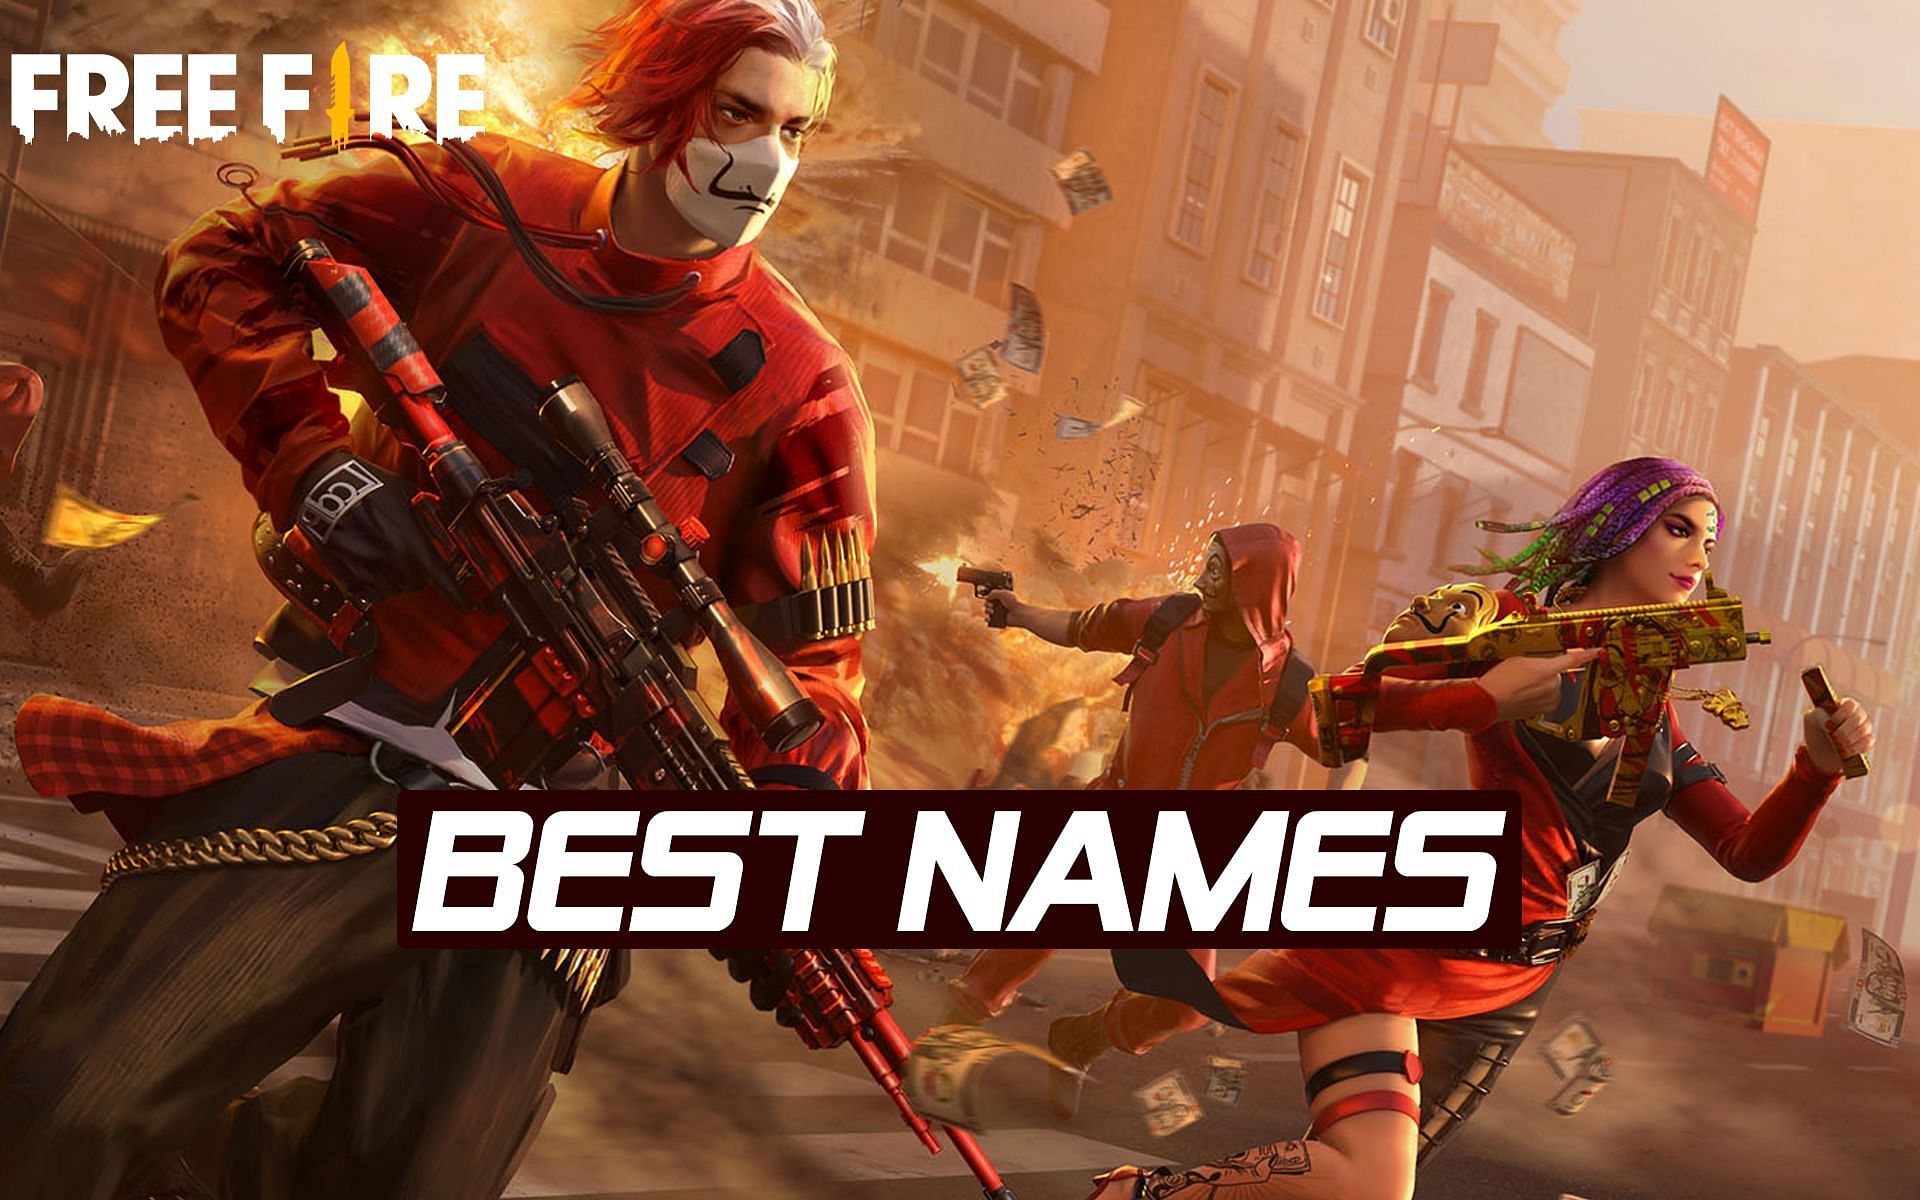 Many users desire to have unique names in Free Fire (Image via Garena)